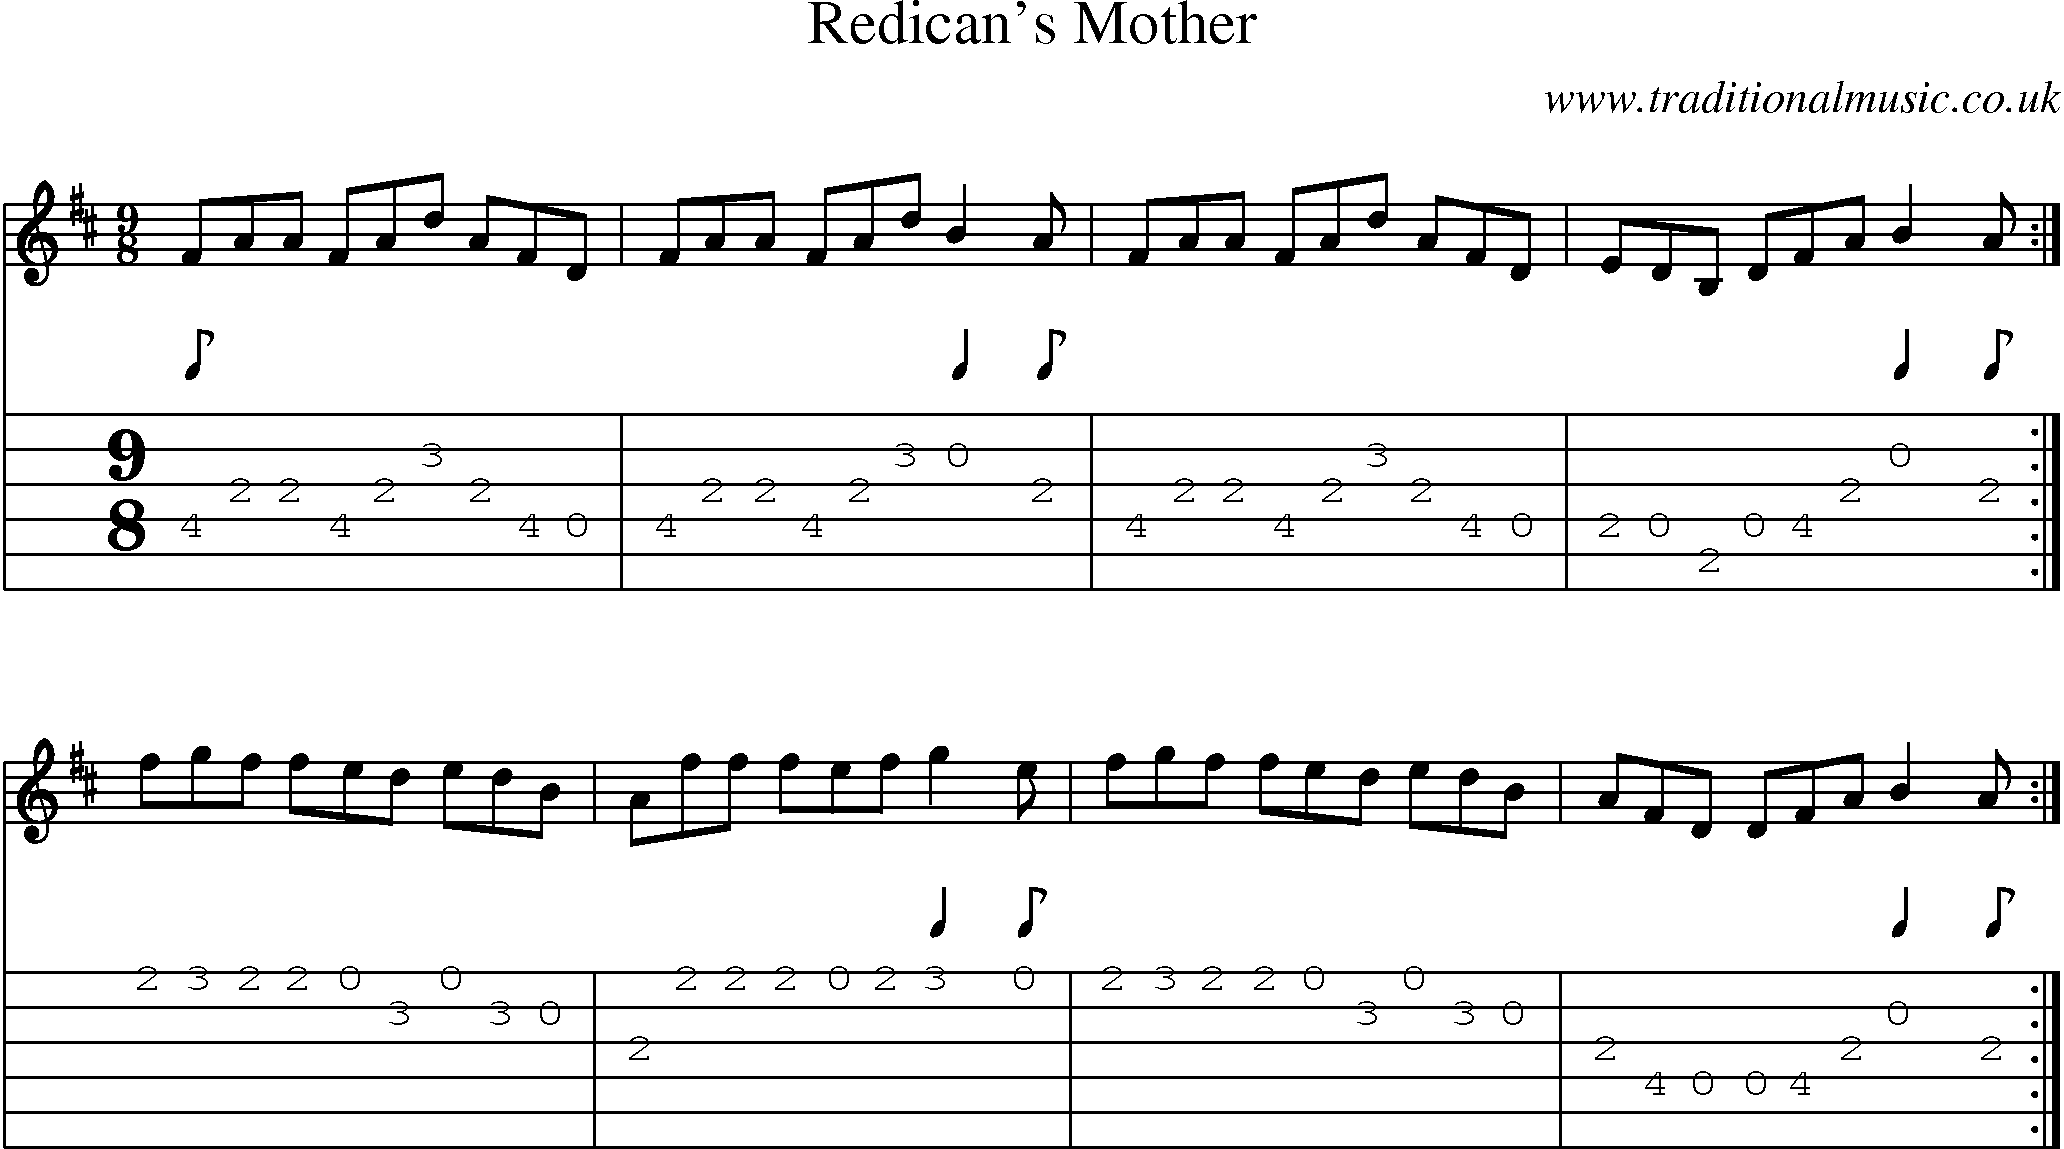 Music Score and Guitar Tabs for Redicans Mother